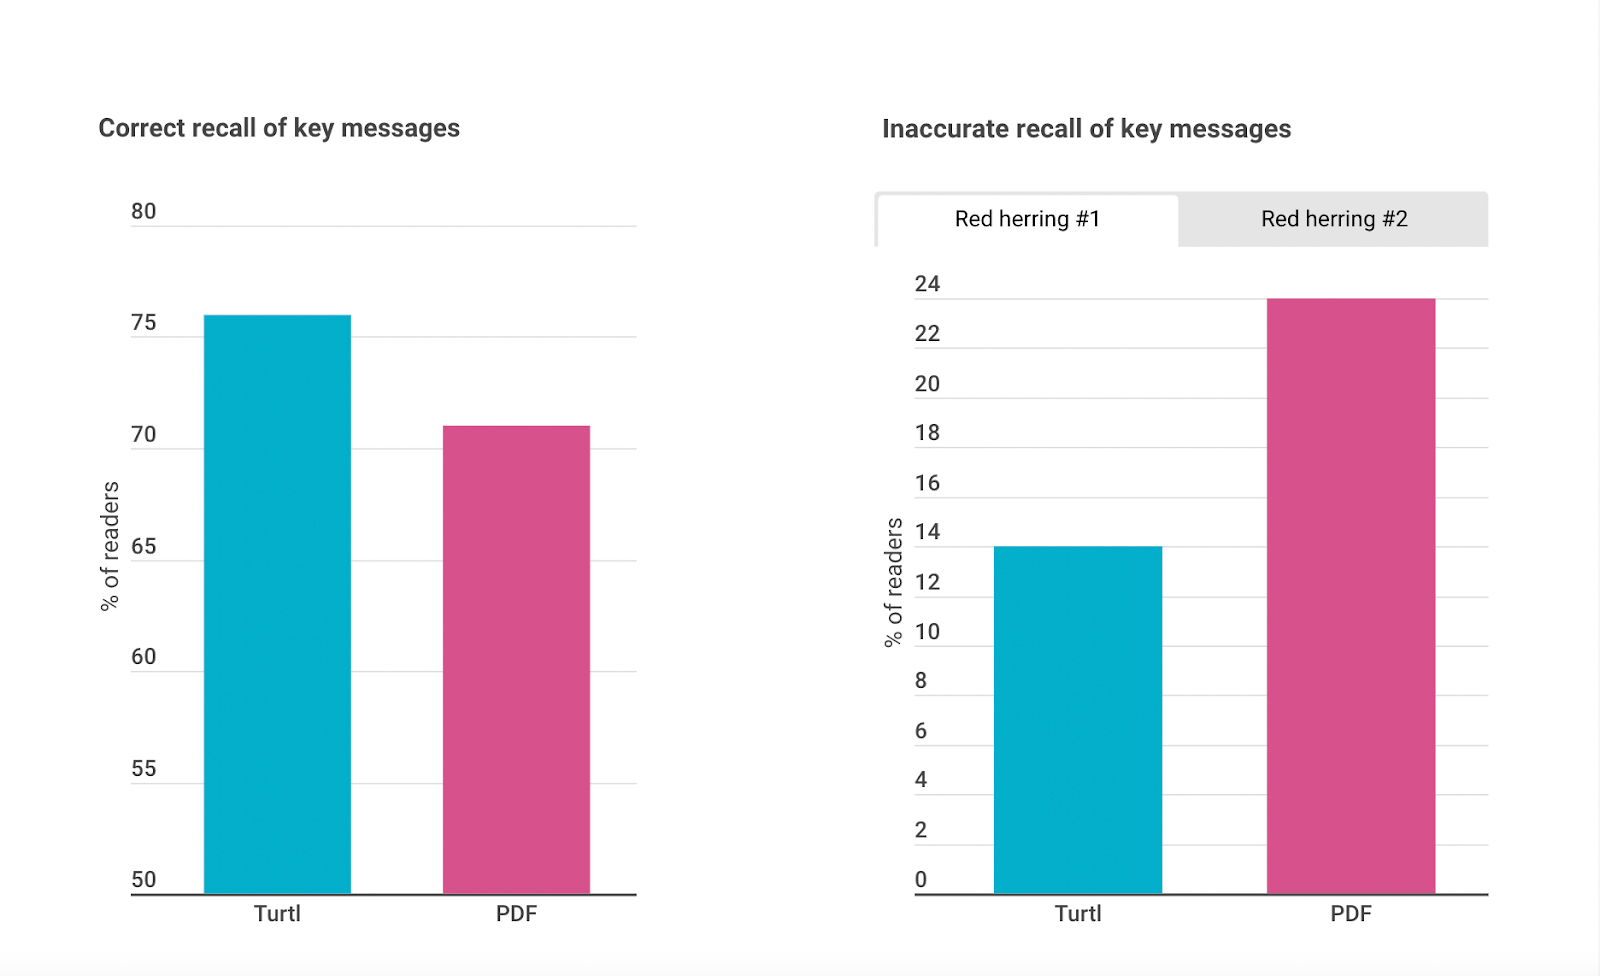 chart showing that 5% more Turtl Doc readers accurately recalled the main content messages compared to PDF readers